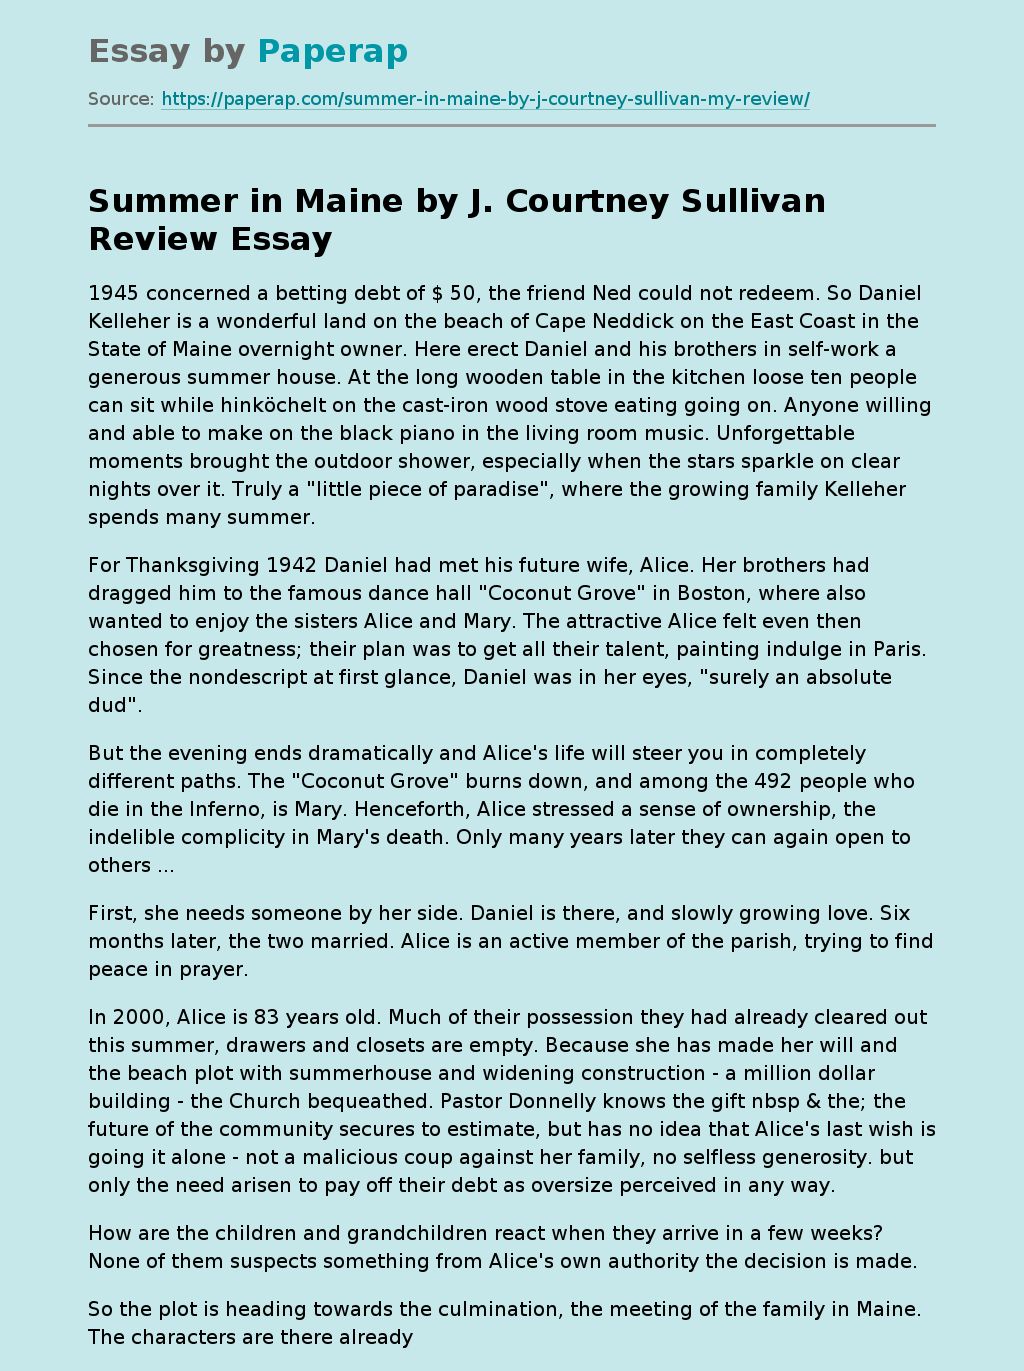 Summer in Maine by J. Courtney Sullivan Review